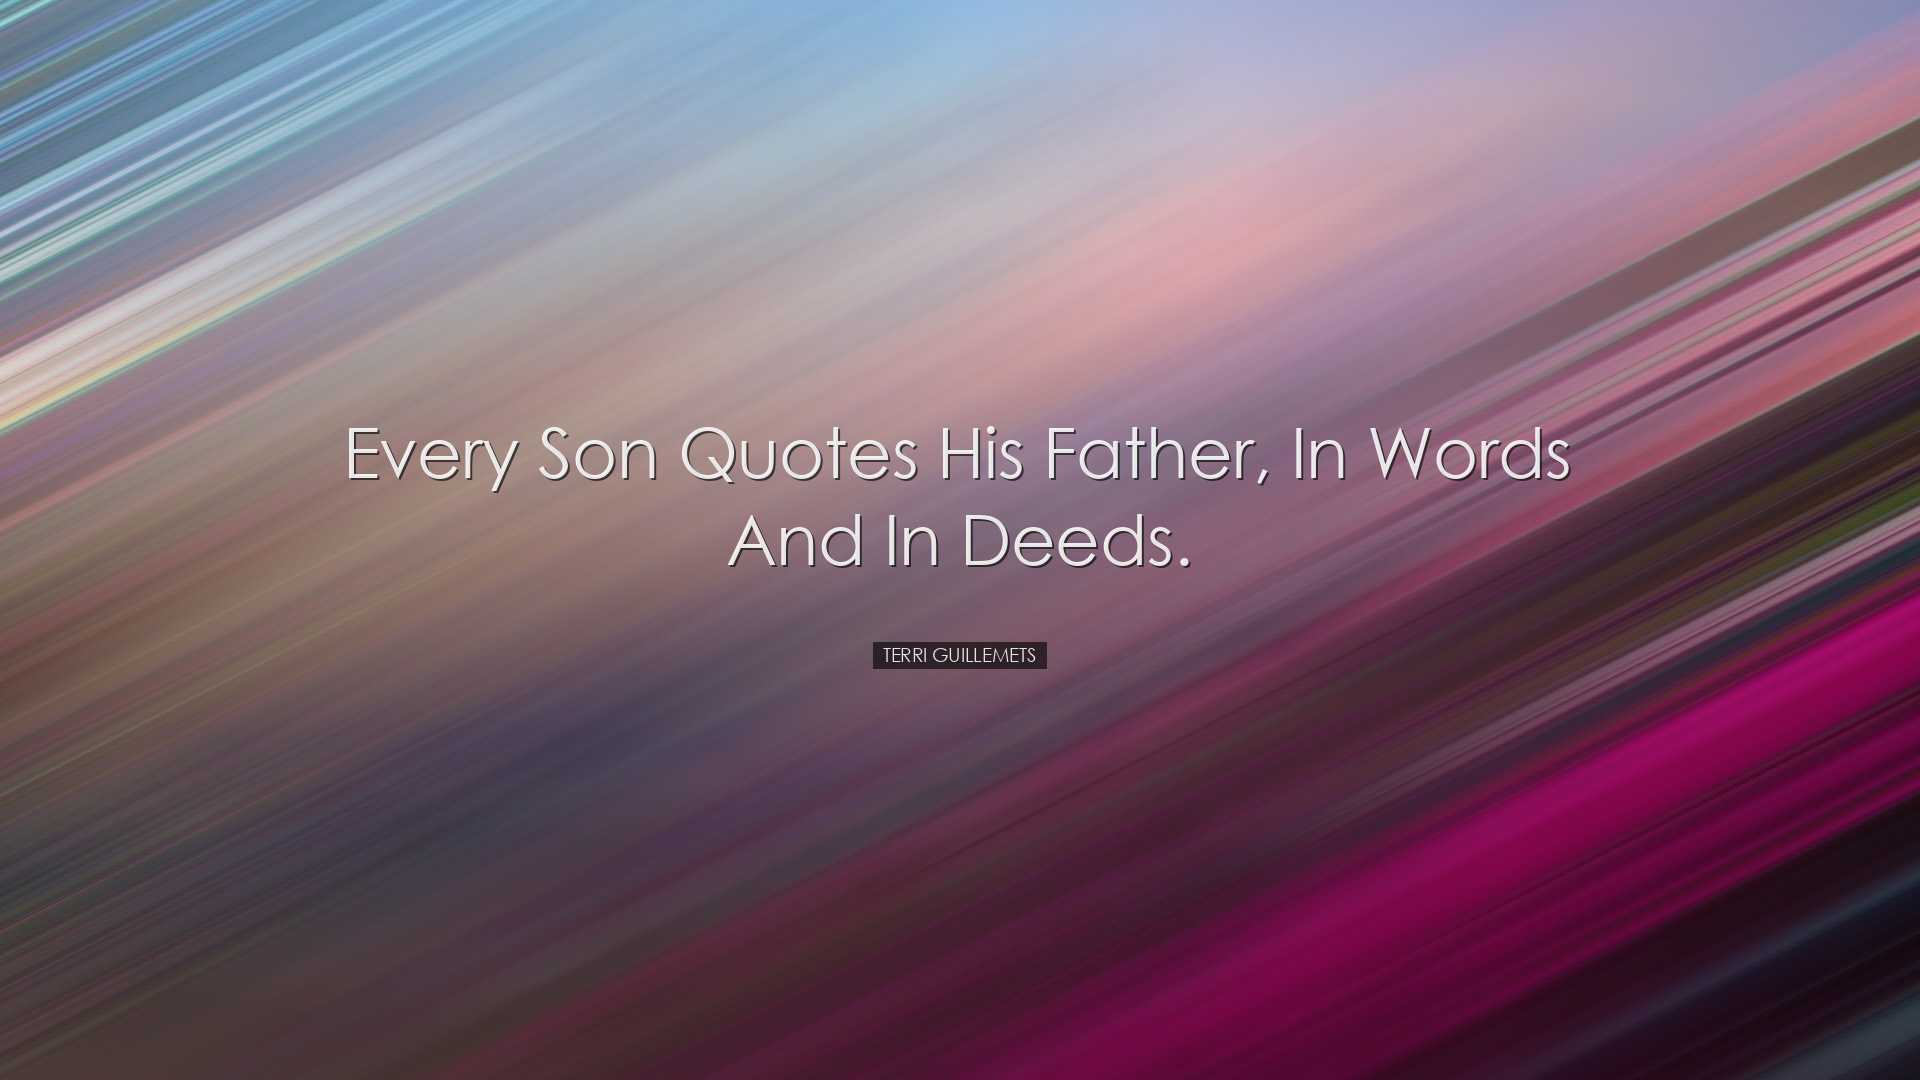 Every son quotes his father, in words and in deeds. - Terri Guille